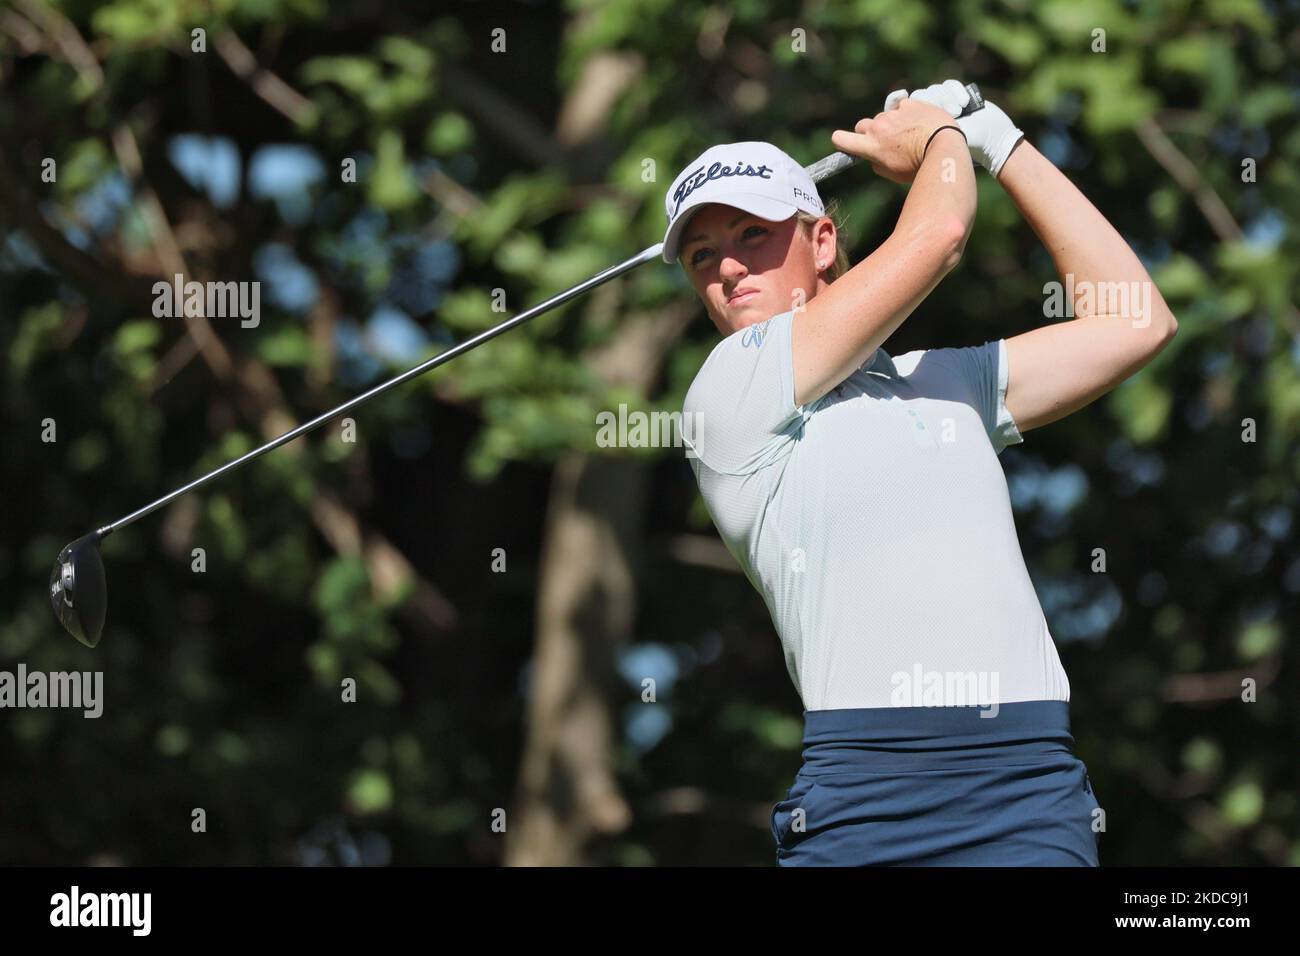 Janie Jackson of Huntsville, Alabama hits from the 4th tee during the first round of the Meijer LPGA Classic golf tournament at Blythefield Country Club in Belmont, MI, USA Thursday, June 16, 2022. (Photo by Amy Lemus/NurPhoto) Stock Photo